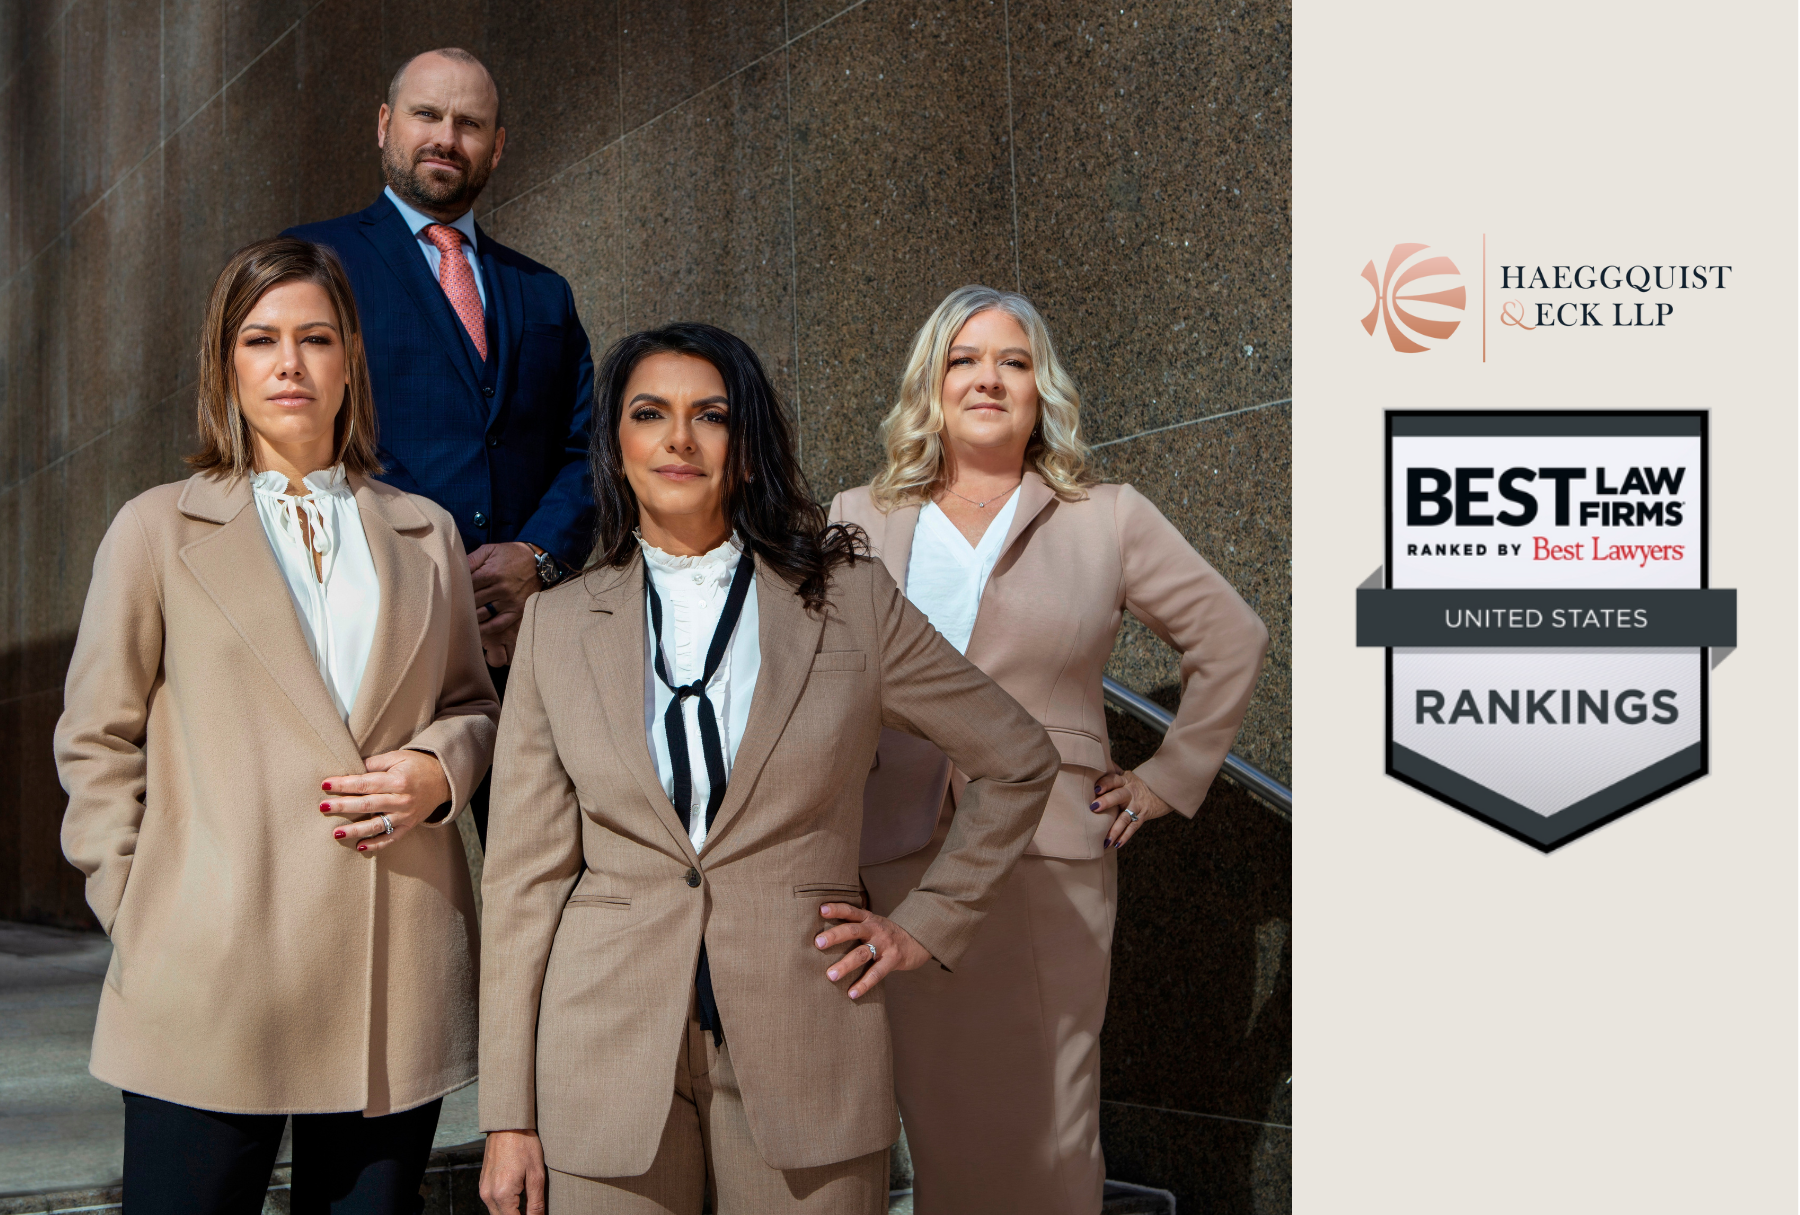 4 attorneys, 3 women and 1 man, standing next to a Best Law Firms 2024 logo